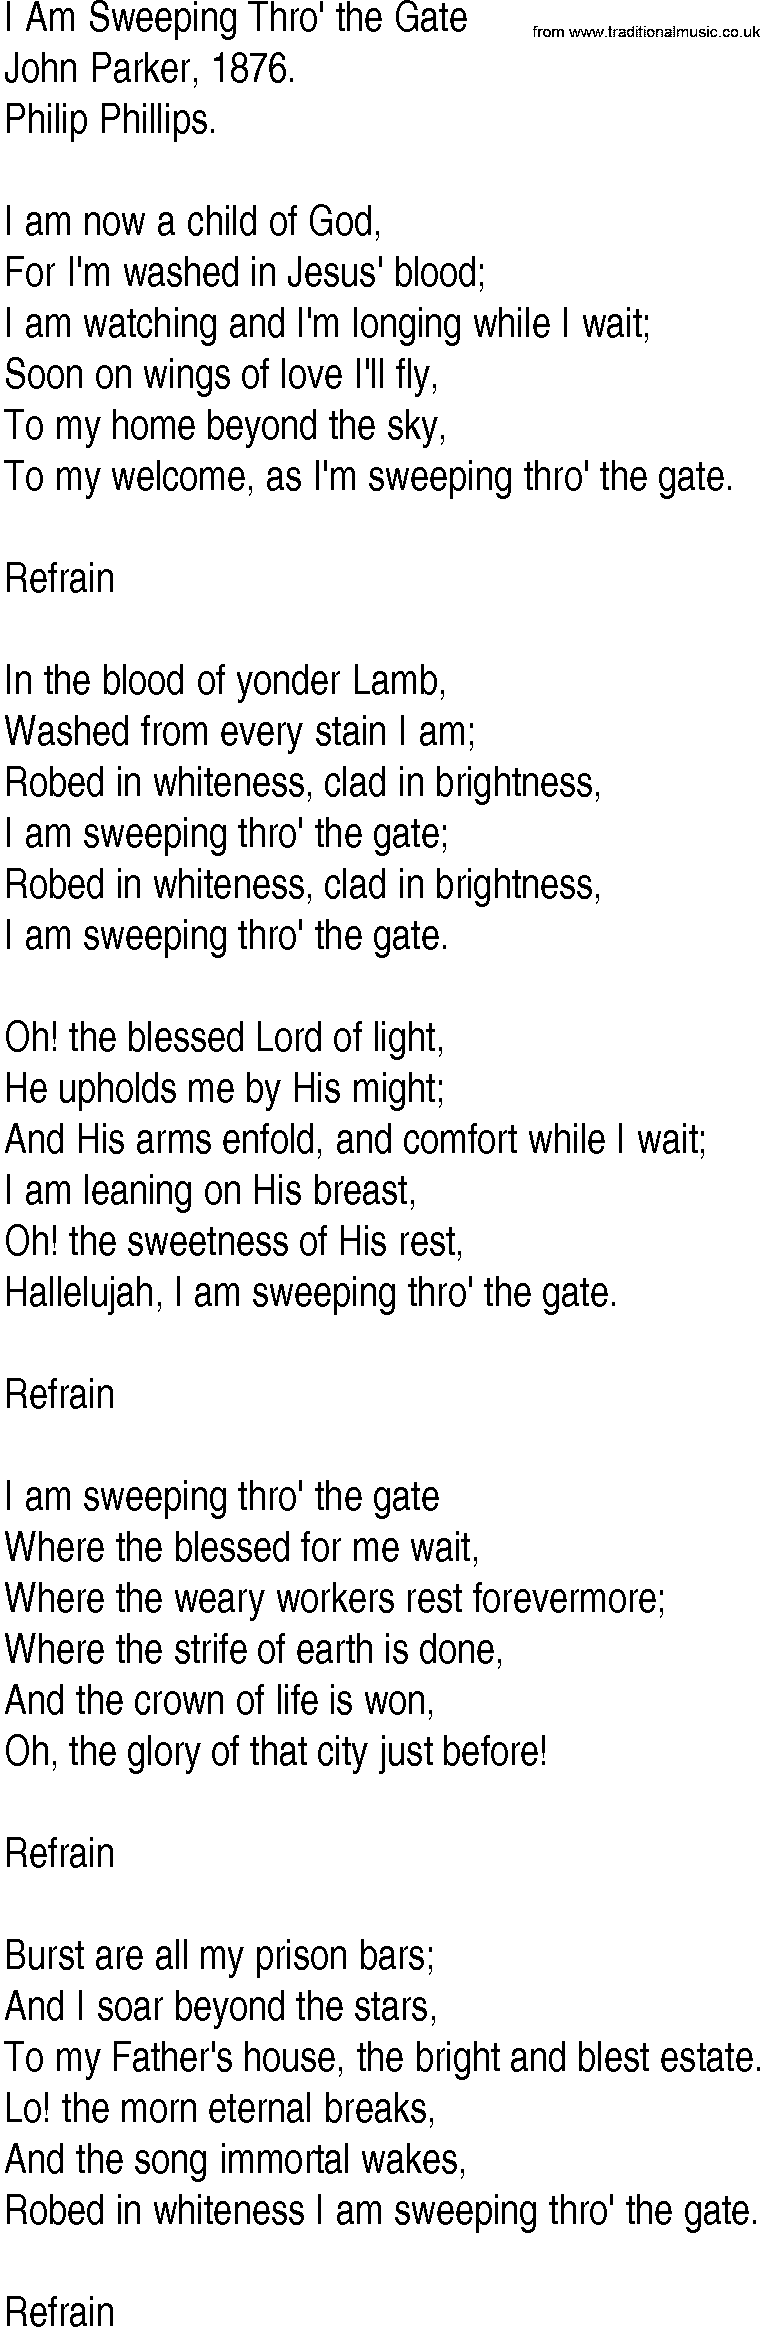 Hymn and Gospel Song: I Am Sweeping Thro' the Gate by John Parker lyrics